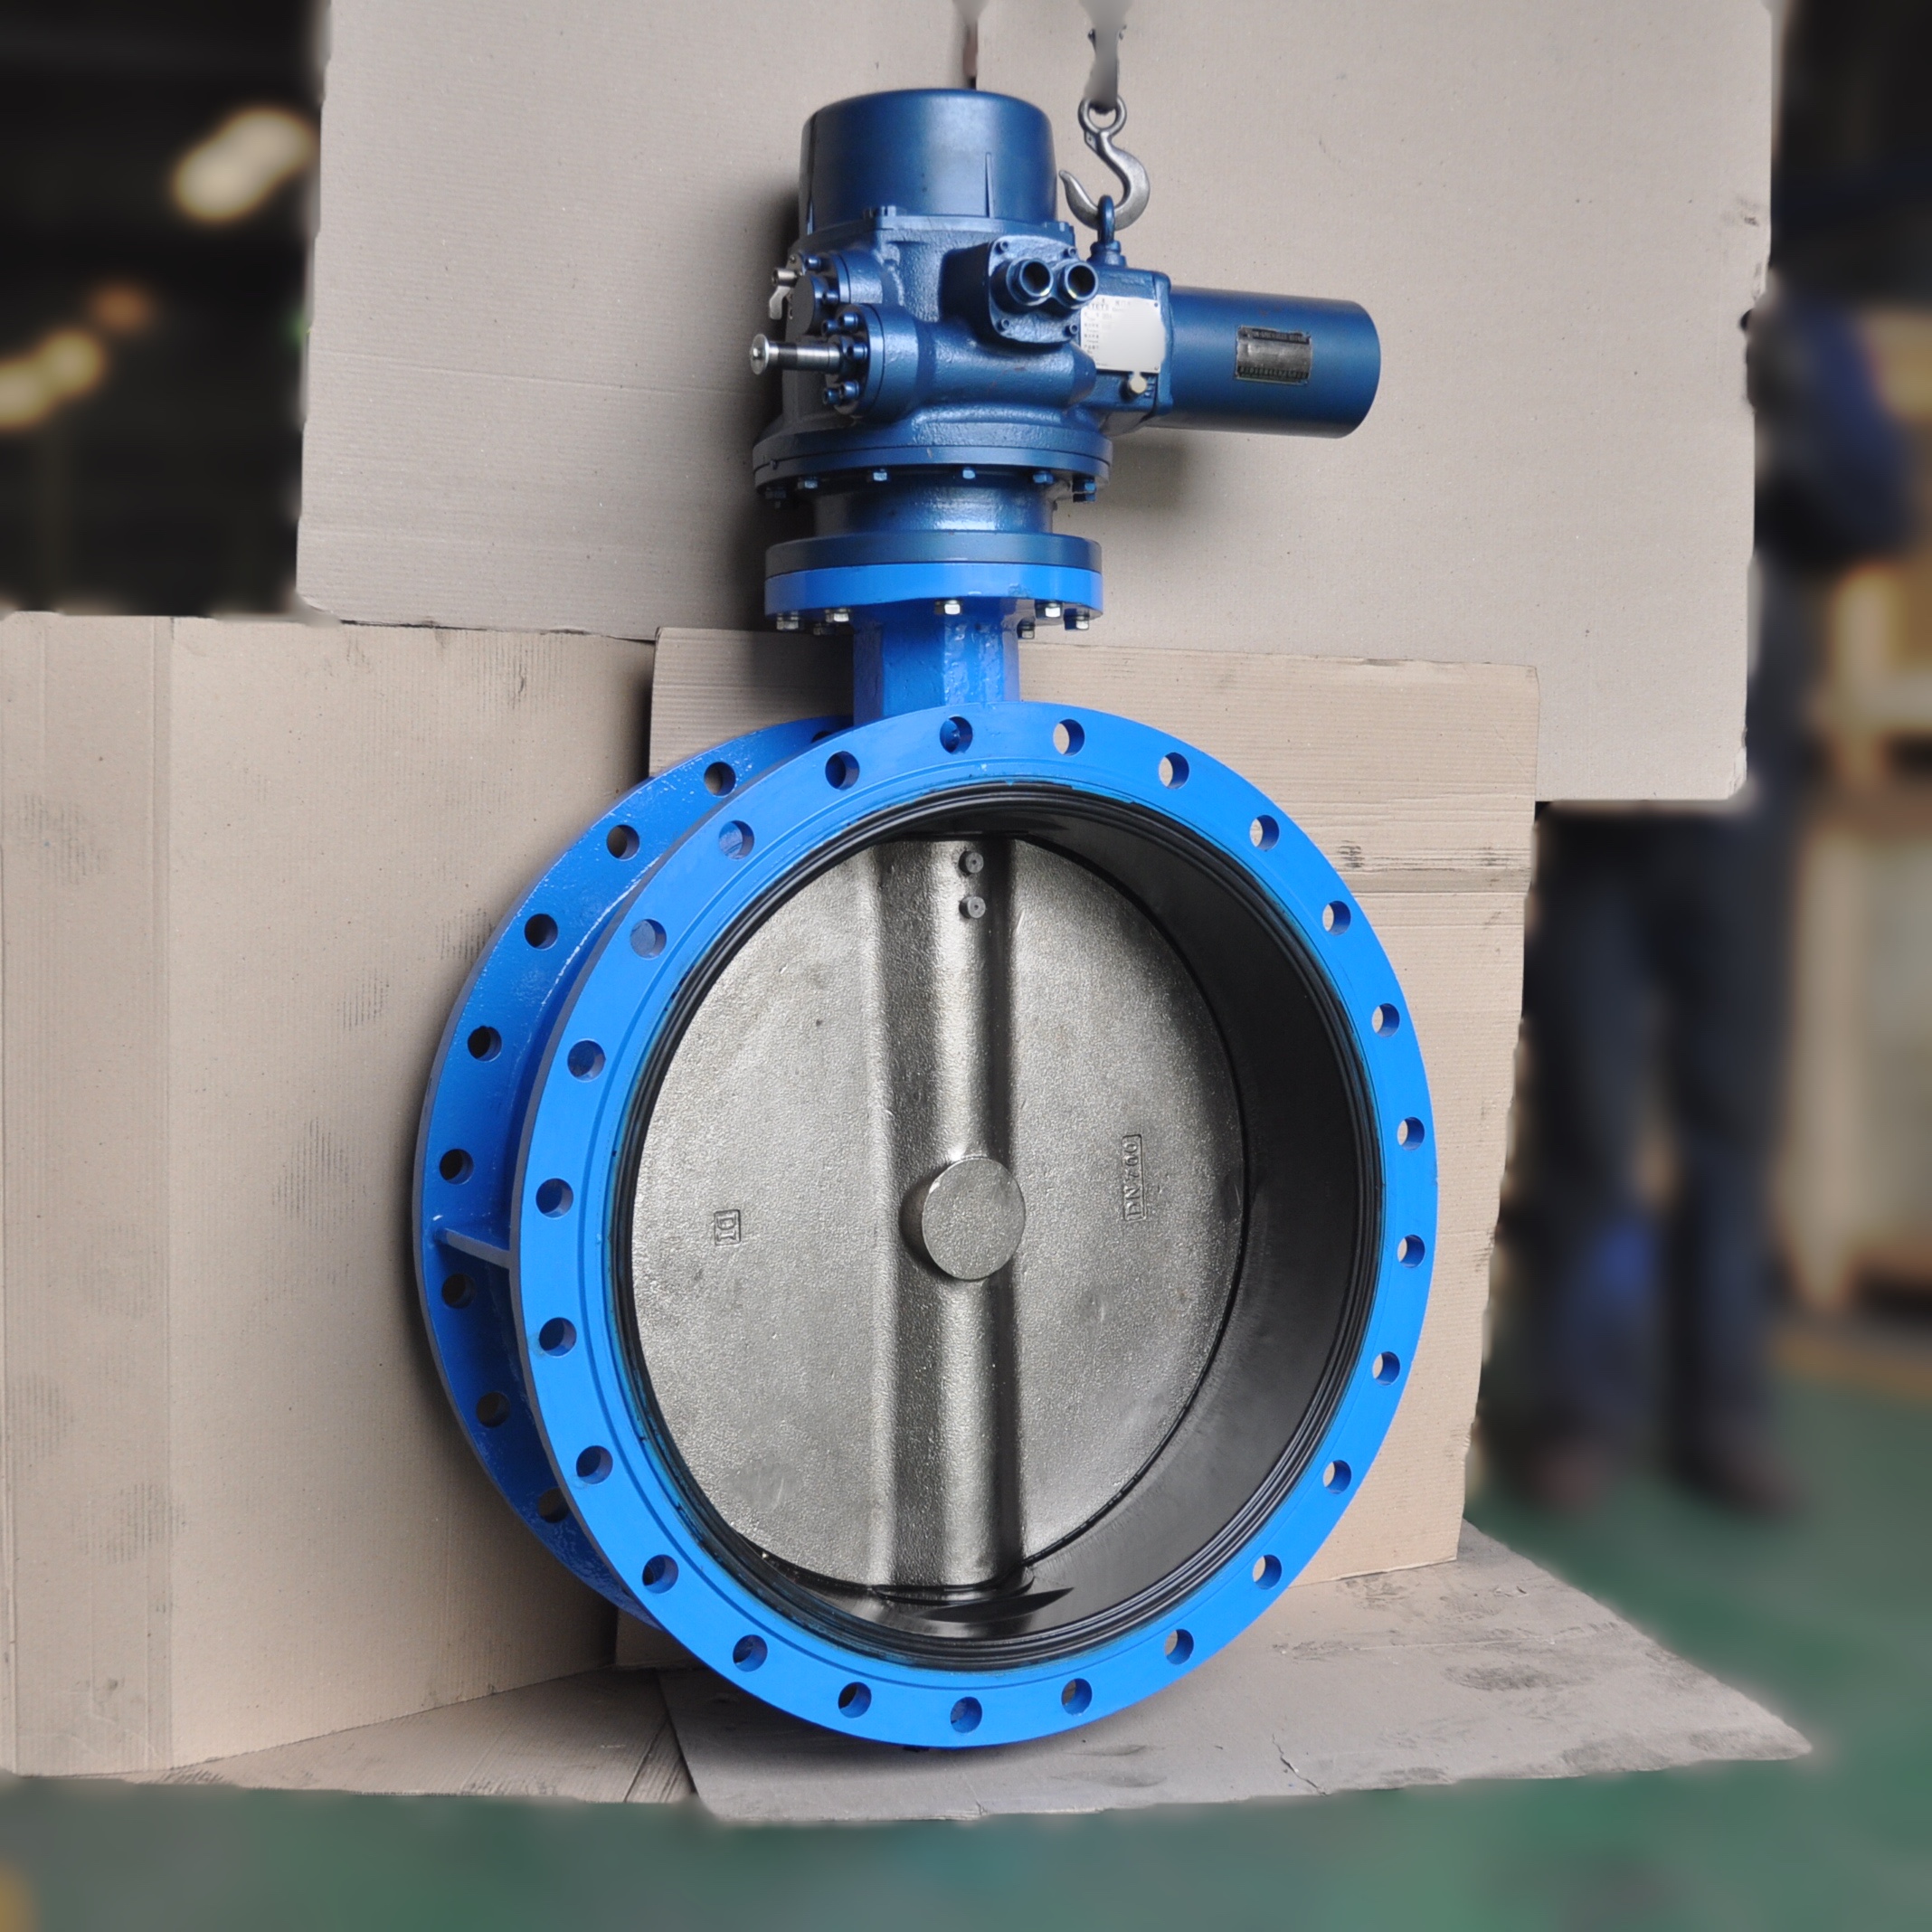 The basis for choosing the butterfly valve electric actuator